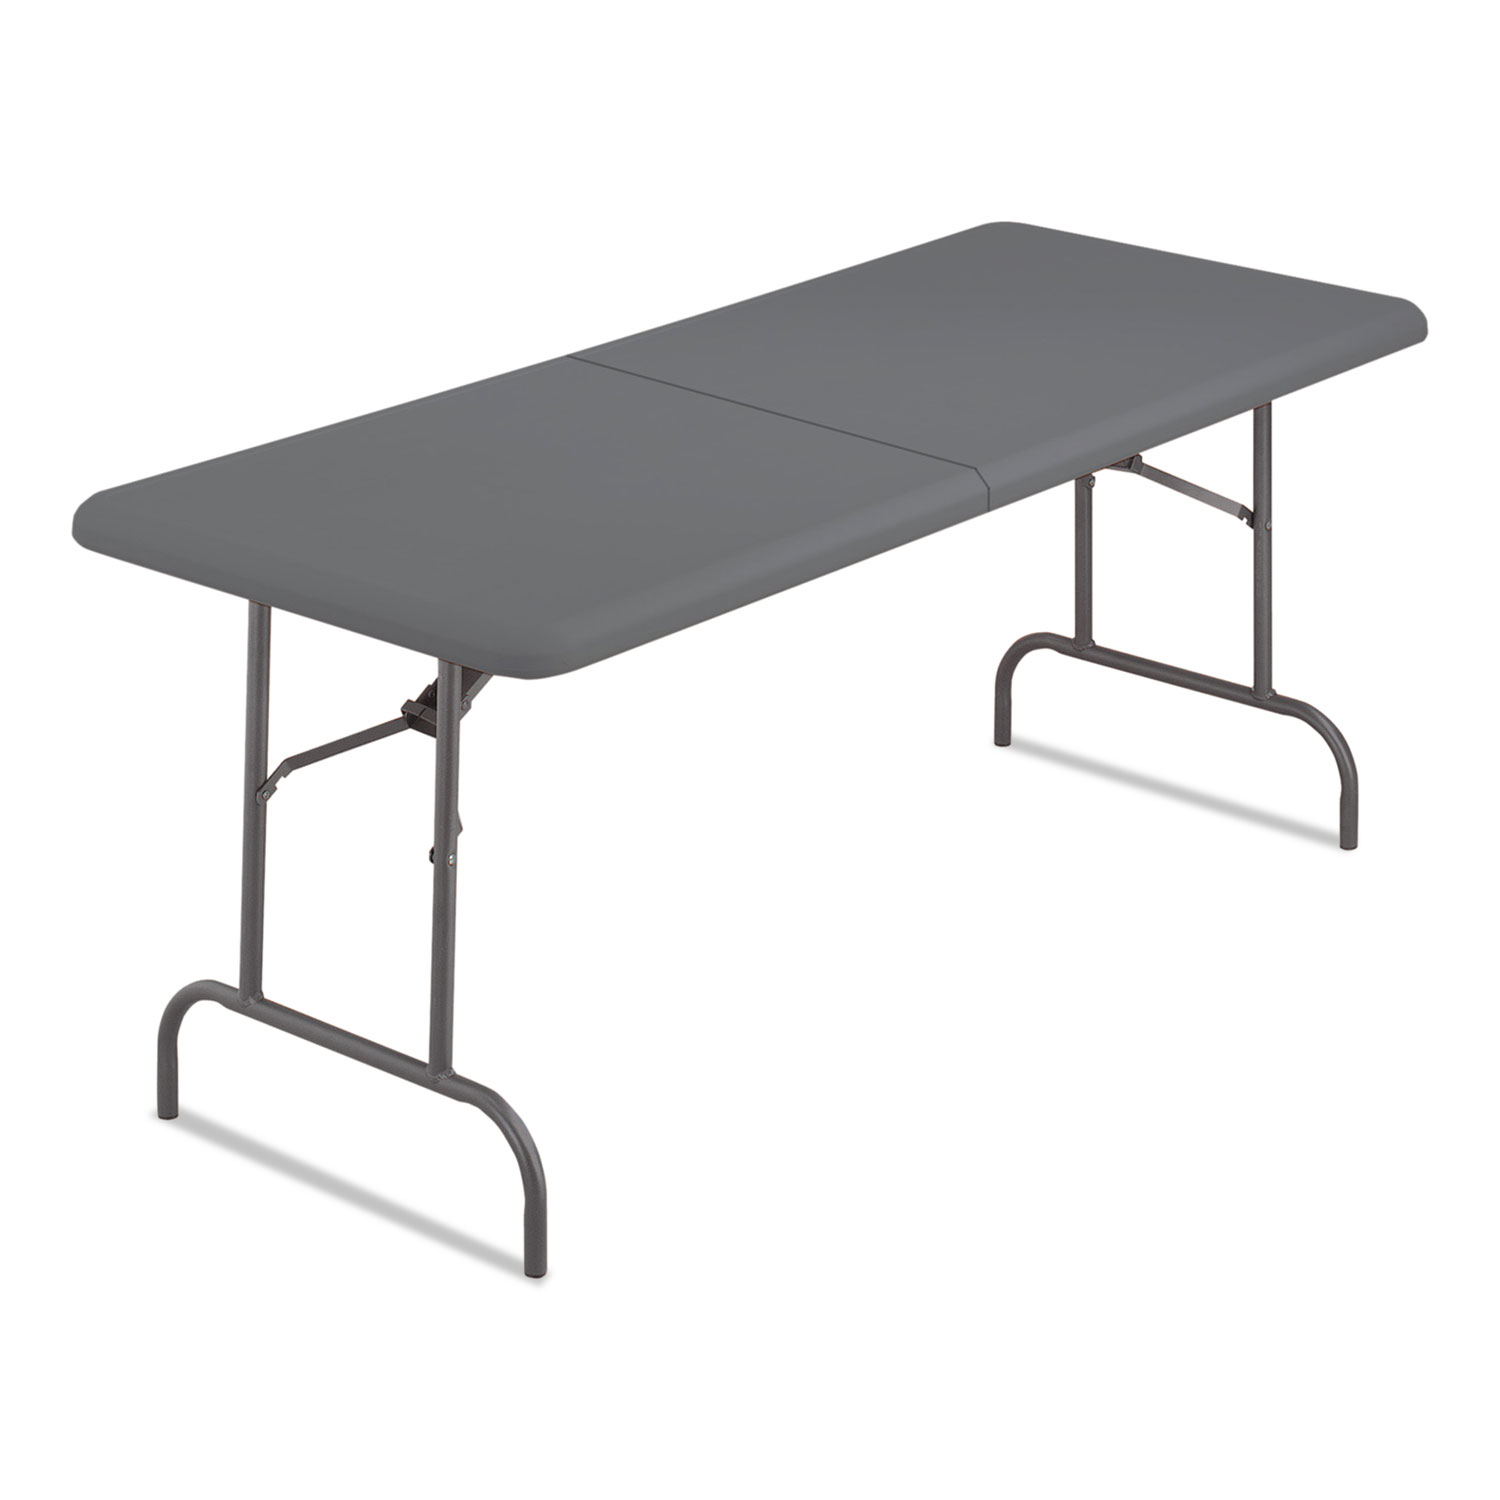  Iceberg 65457 IndestrucTables Too 1200 Series Bi-Fold Table, 60w x 30d x 29h, Charcoal (ICE65457) 